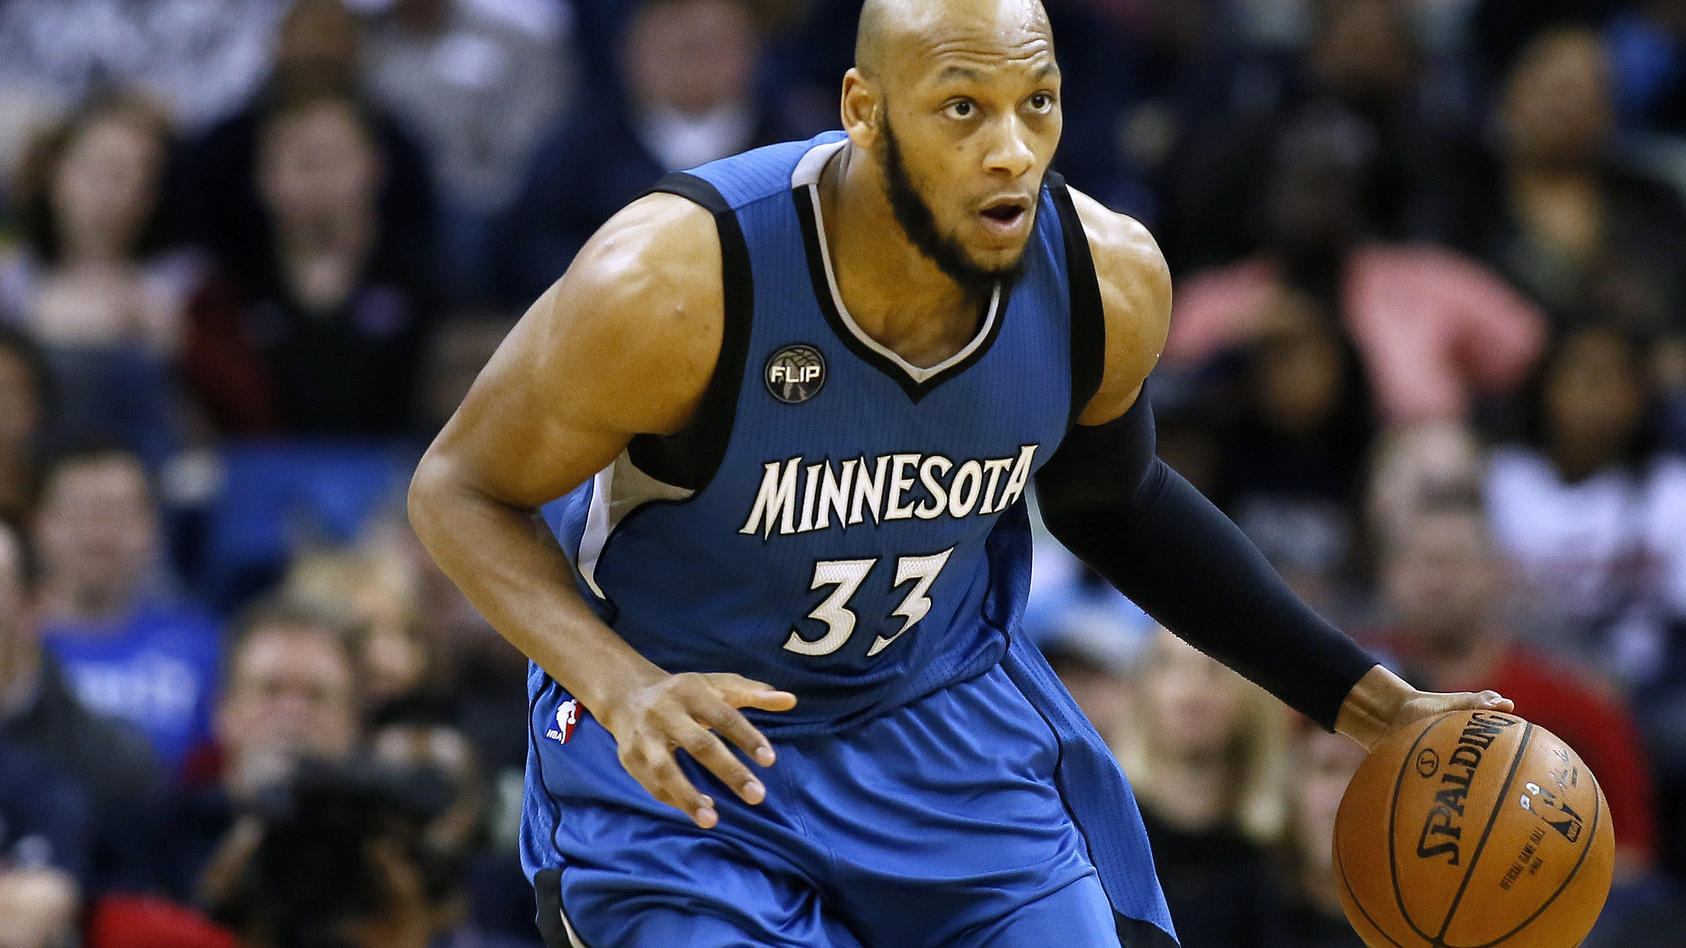 FILE - Minnesota Timberwolves forward Adreian Payne (33) drives with the ball during the second half of an NBA basketball game, Feb. 27, 2016, in New Orleans. Former Michigan State basketball standout and NBA player Adreian Payne has died. He was 31.